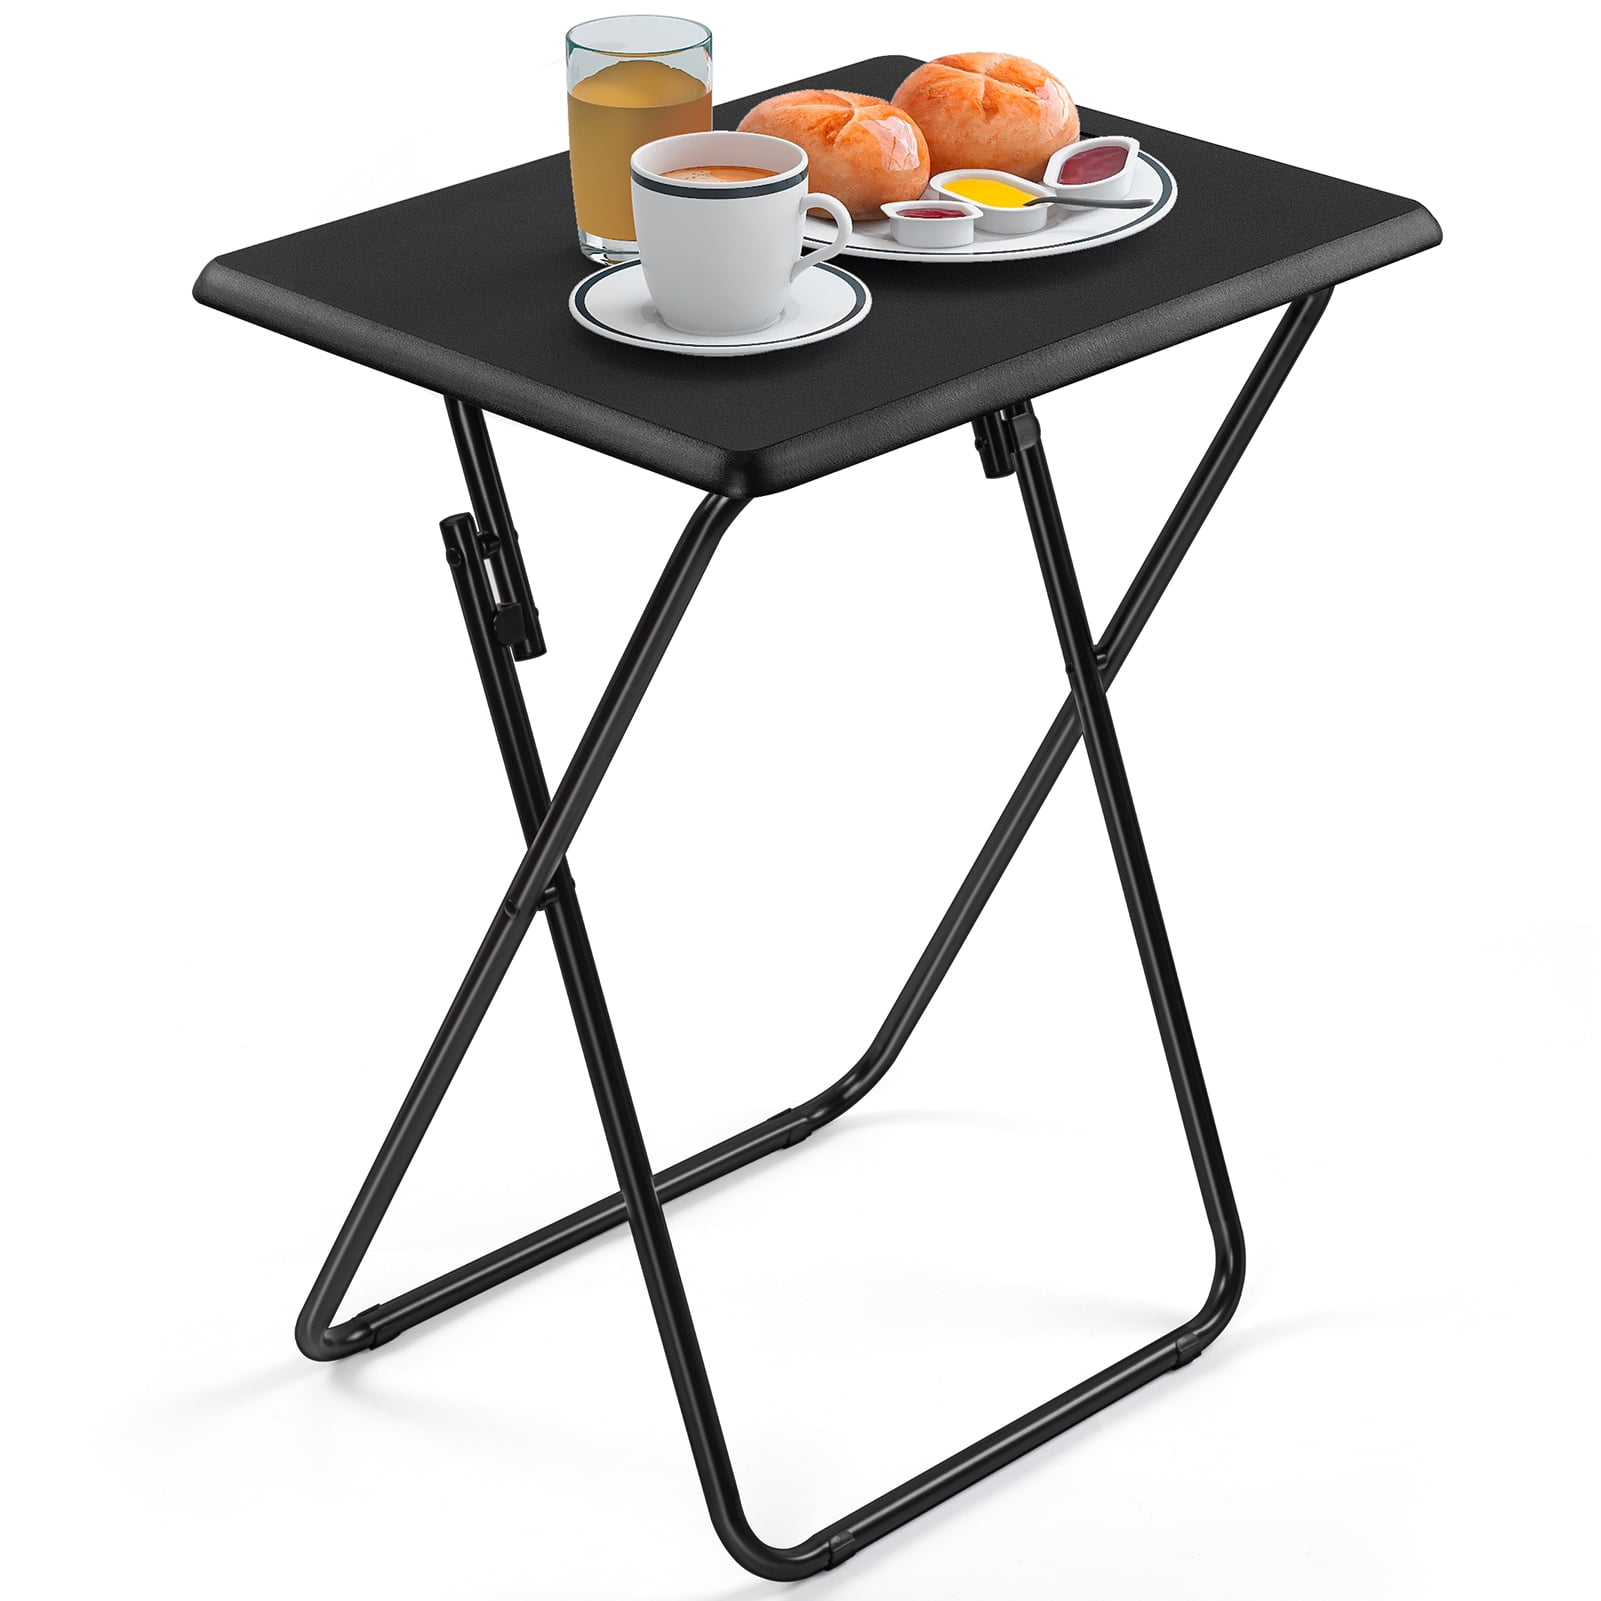 New Style Smart Table Companion Foldable Folding Table Adjustable Tray for Home 